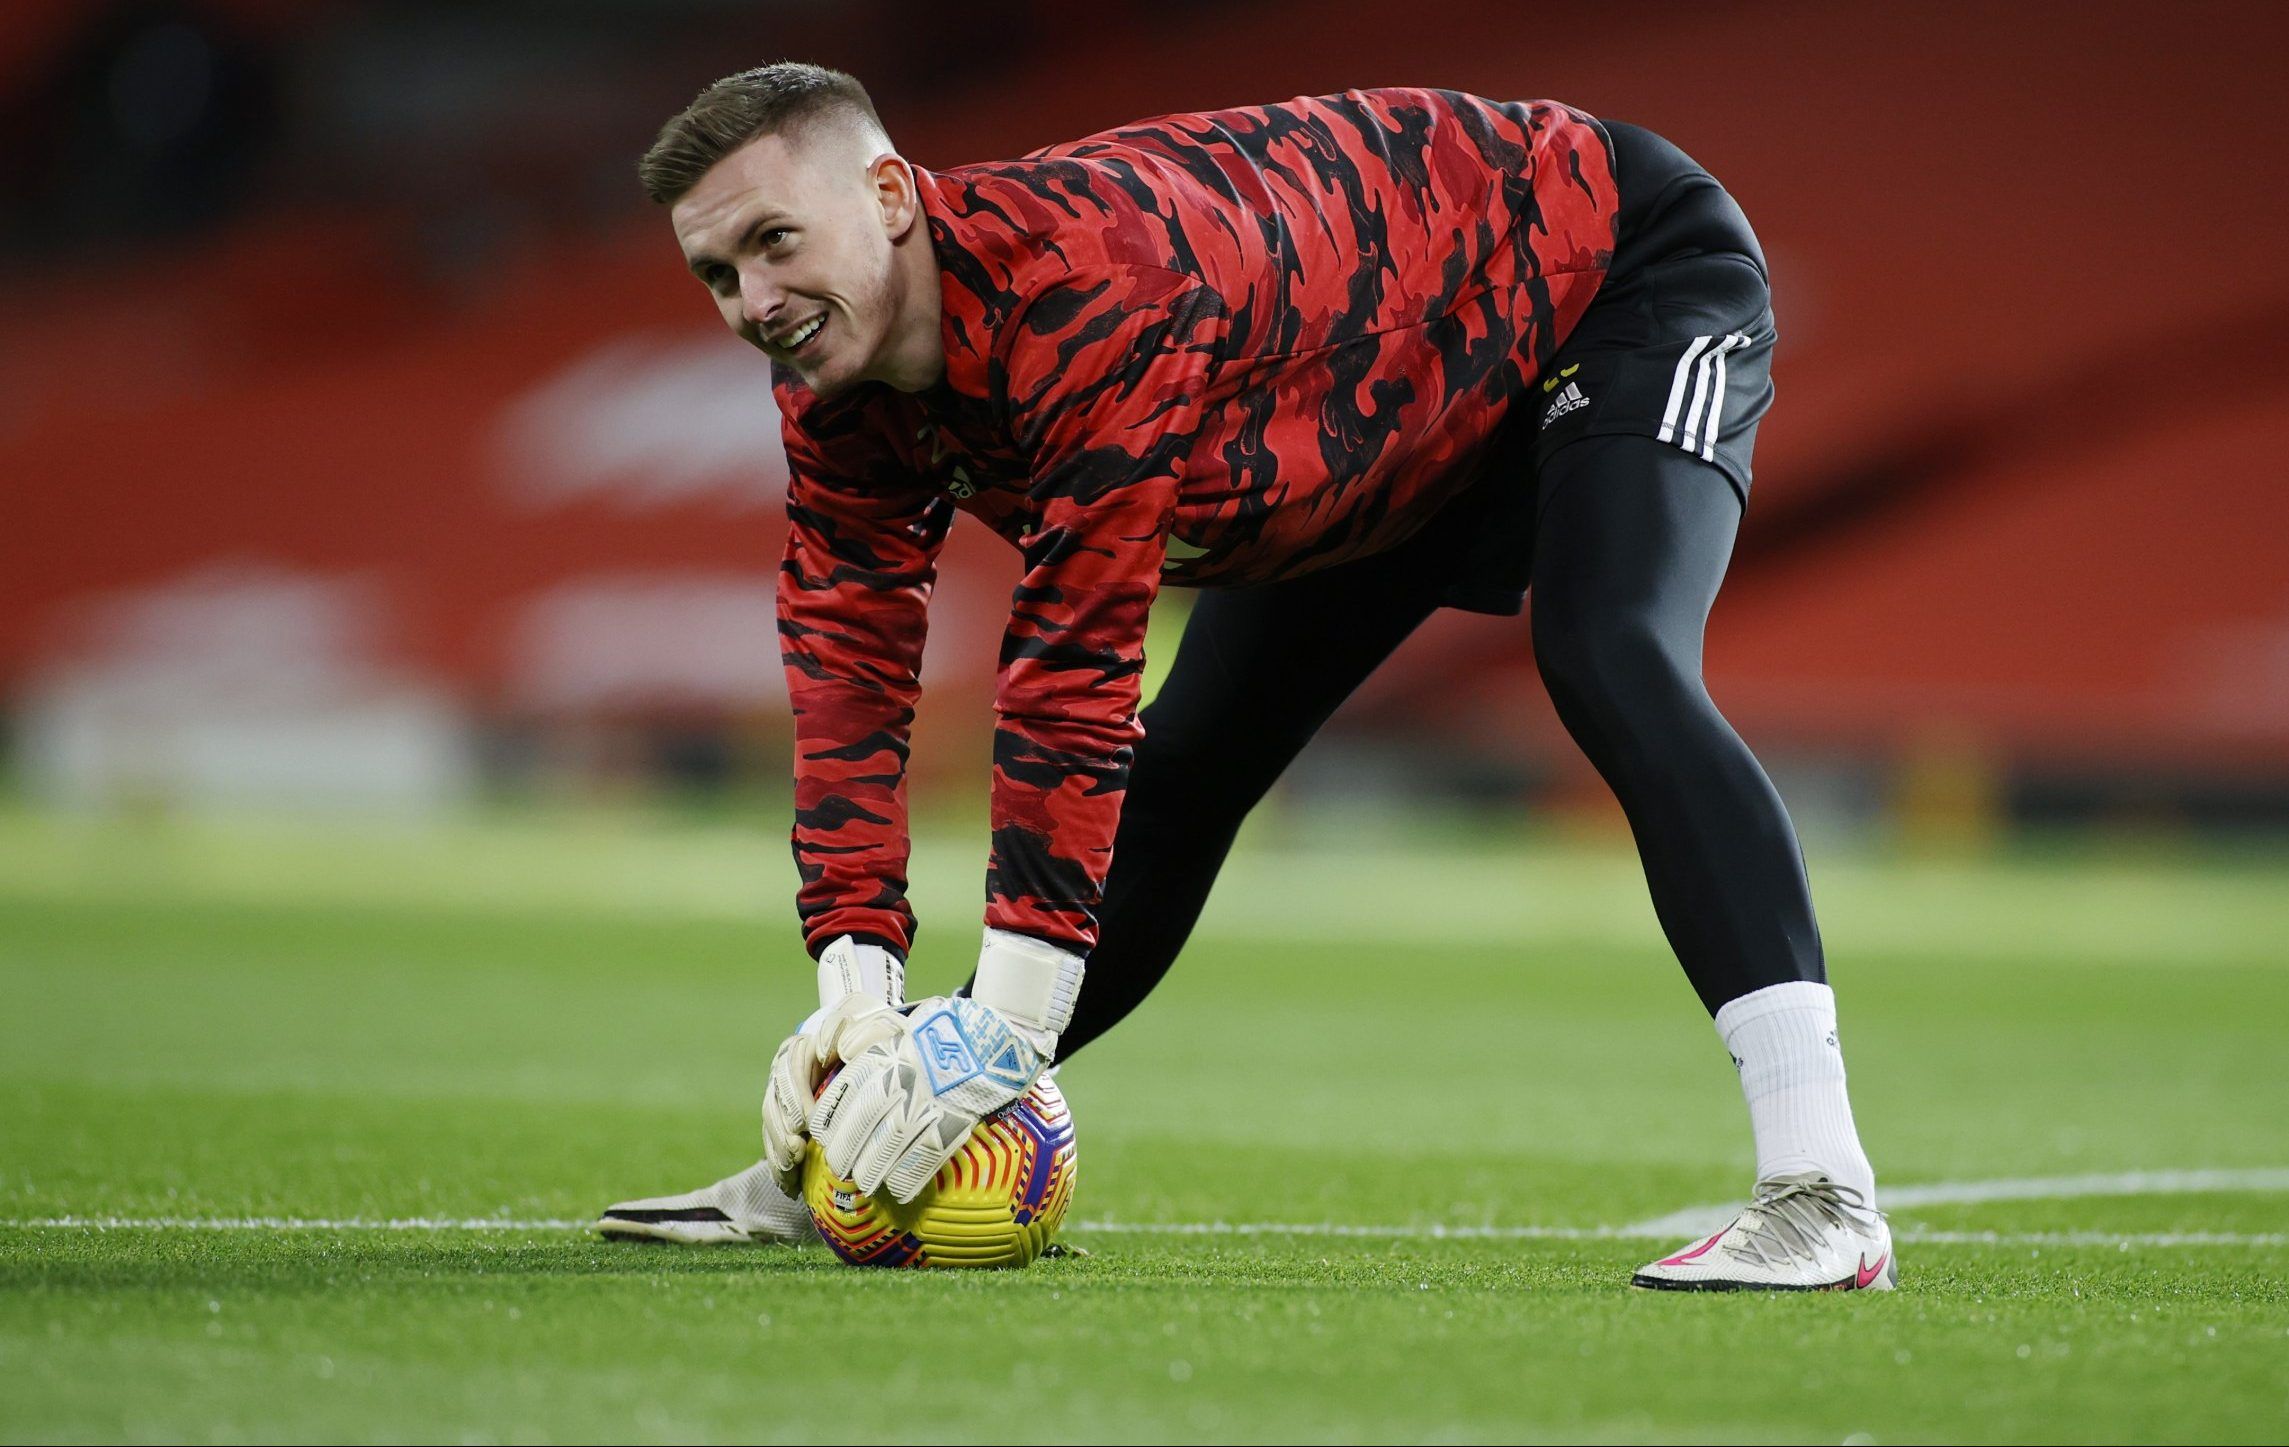 MUFC, Manchester United, Old Trafford, Dean Henderson, MUFC news, FA Cup, Red Devils, Premier League